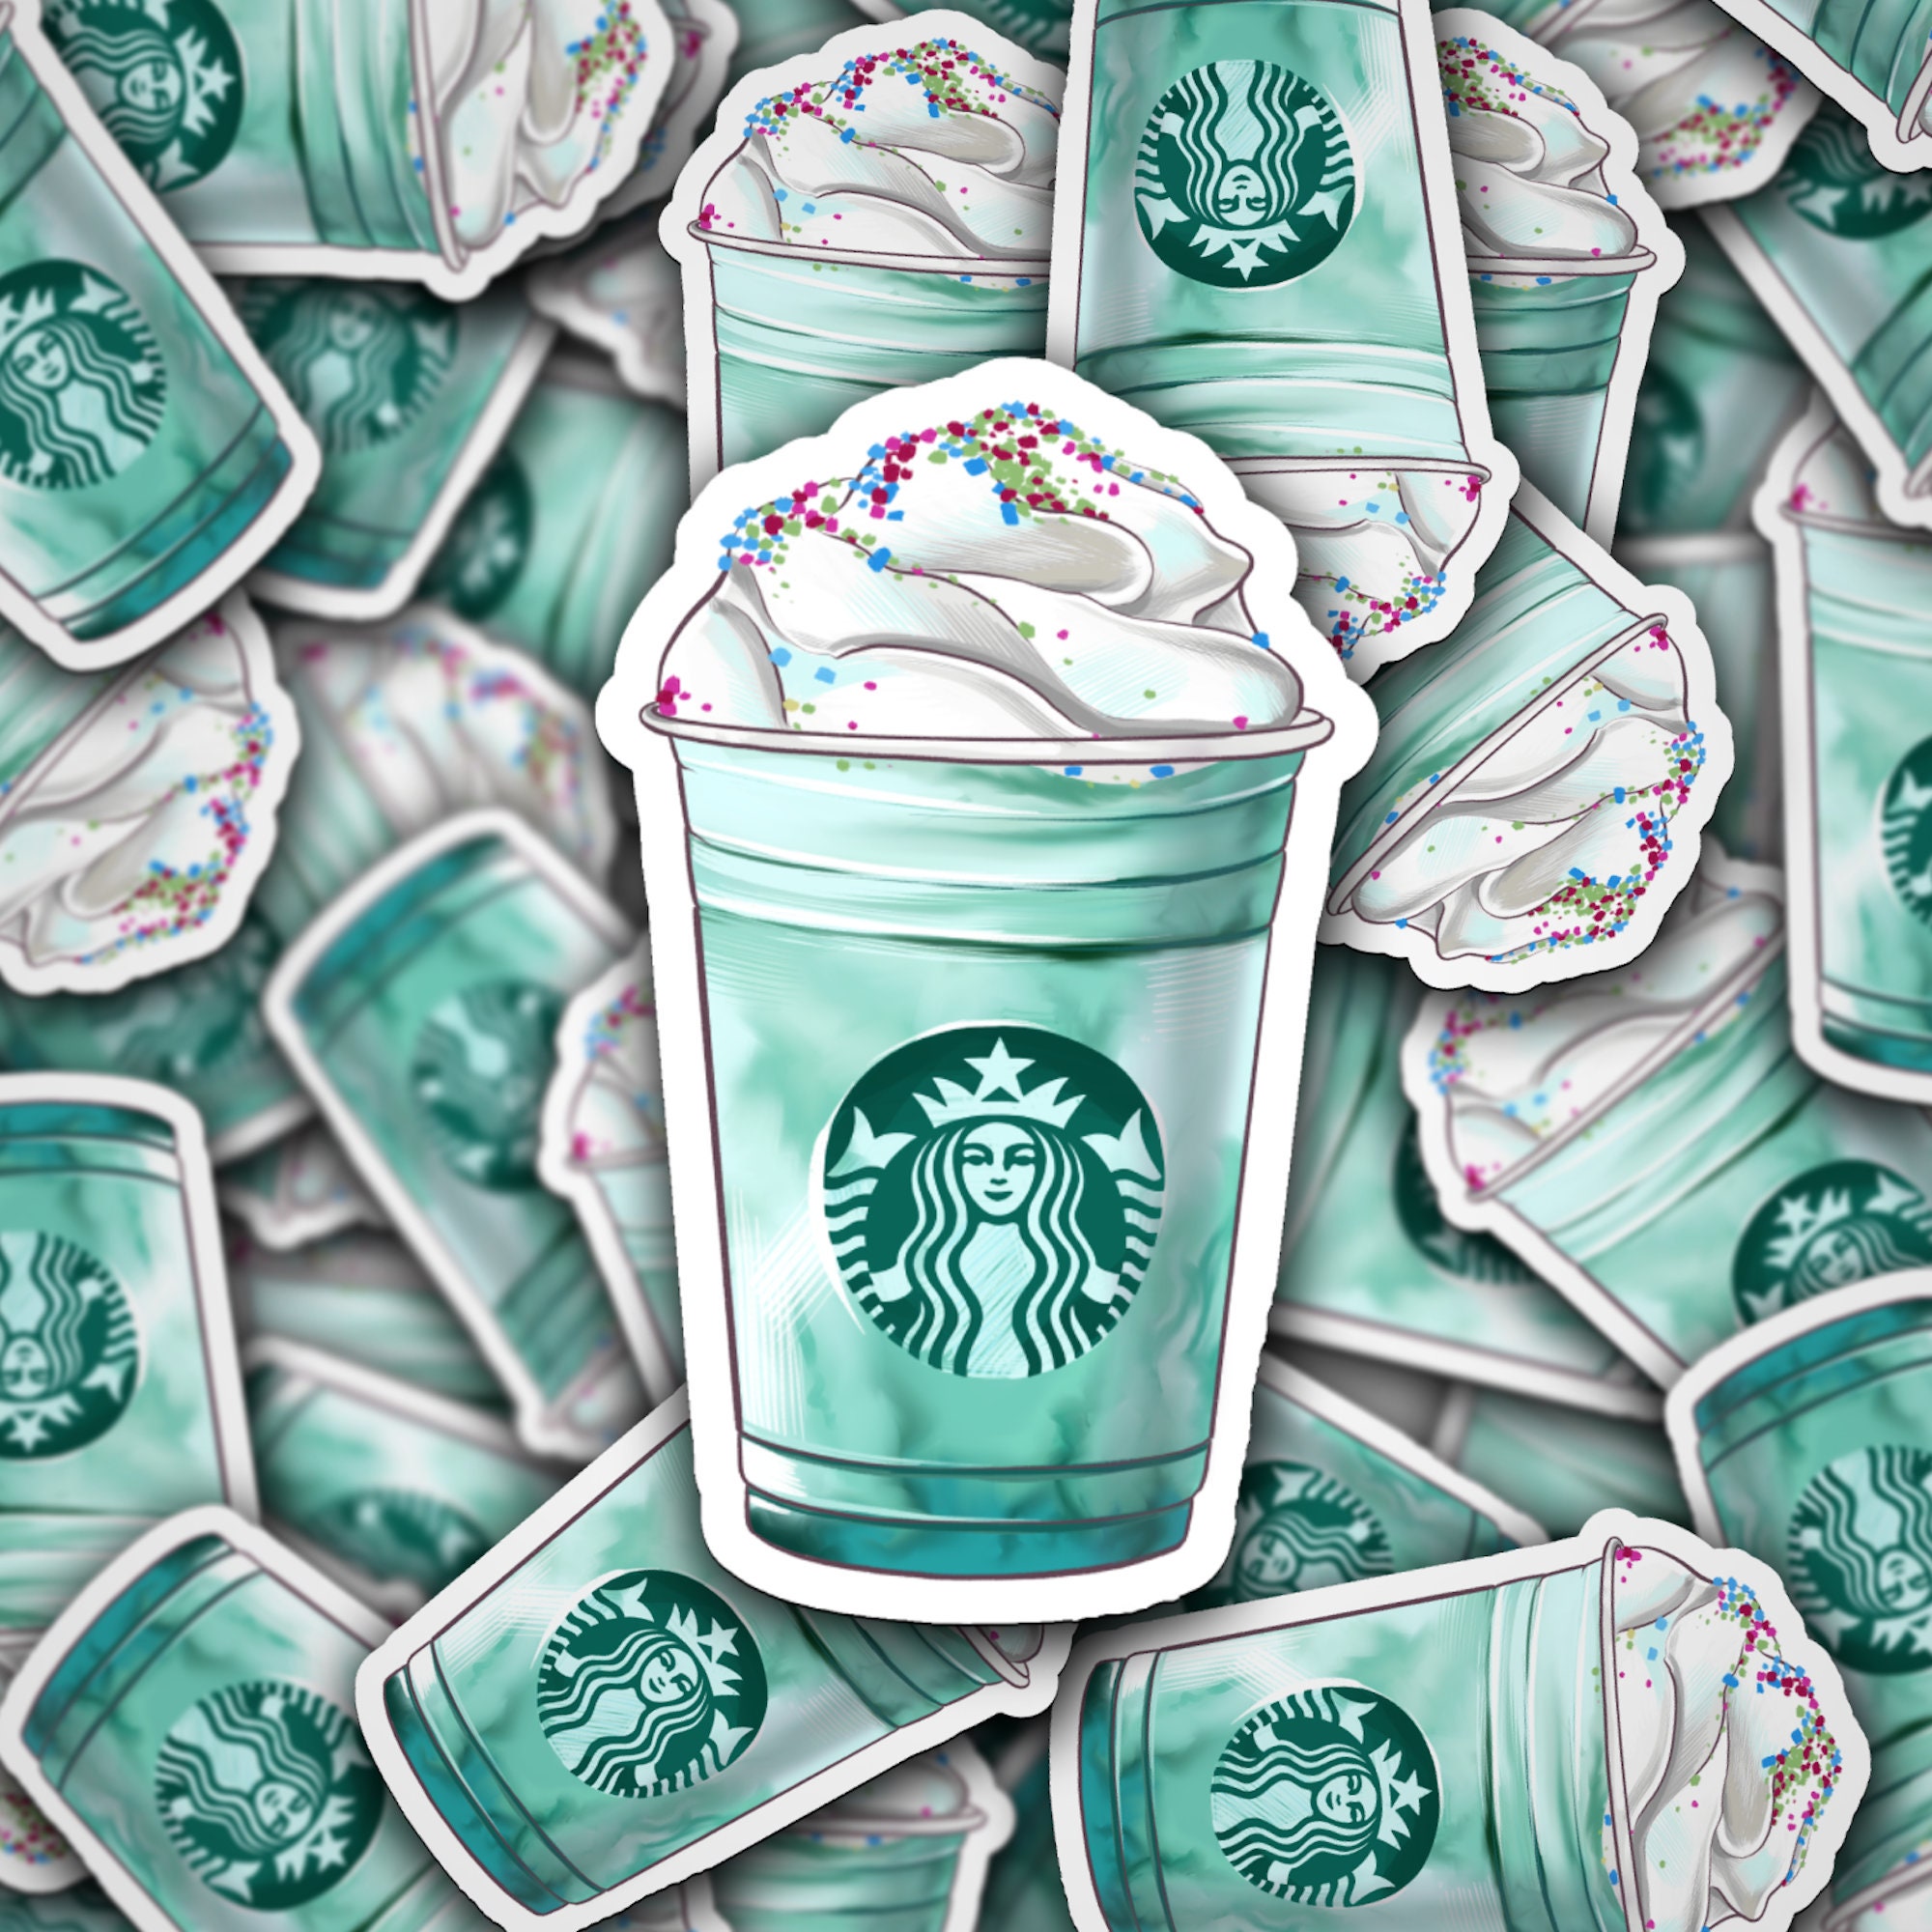 A sticker of a Starbucks drink with sprinkles on top - Starbucks